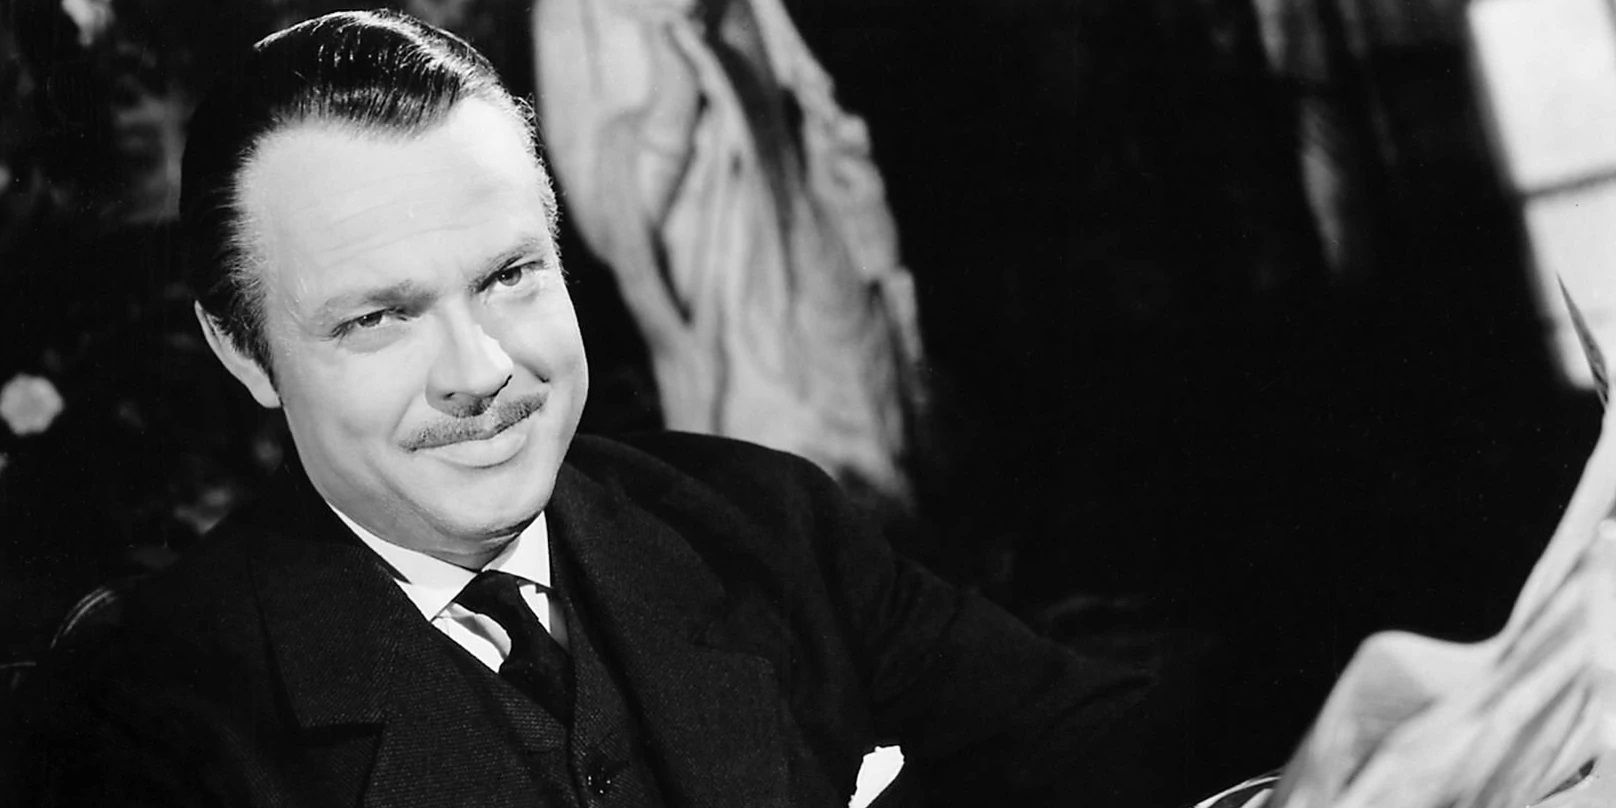 Orson Welles as Charles Foster Kane in Citizen Kane